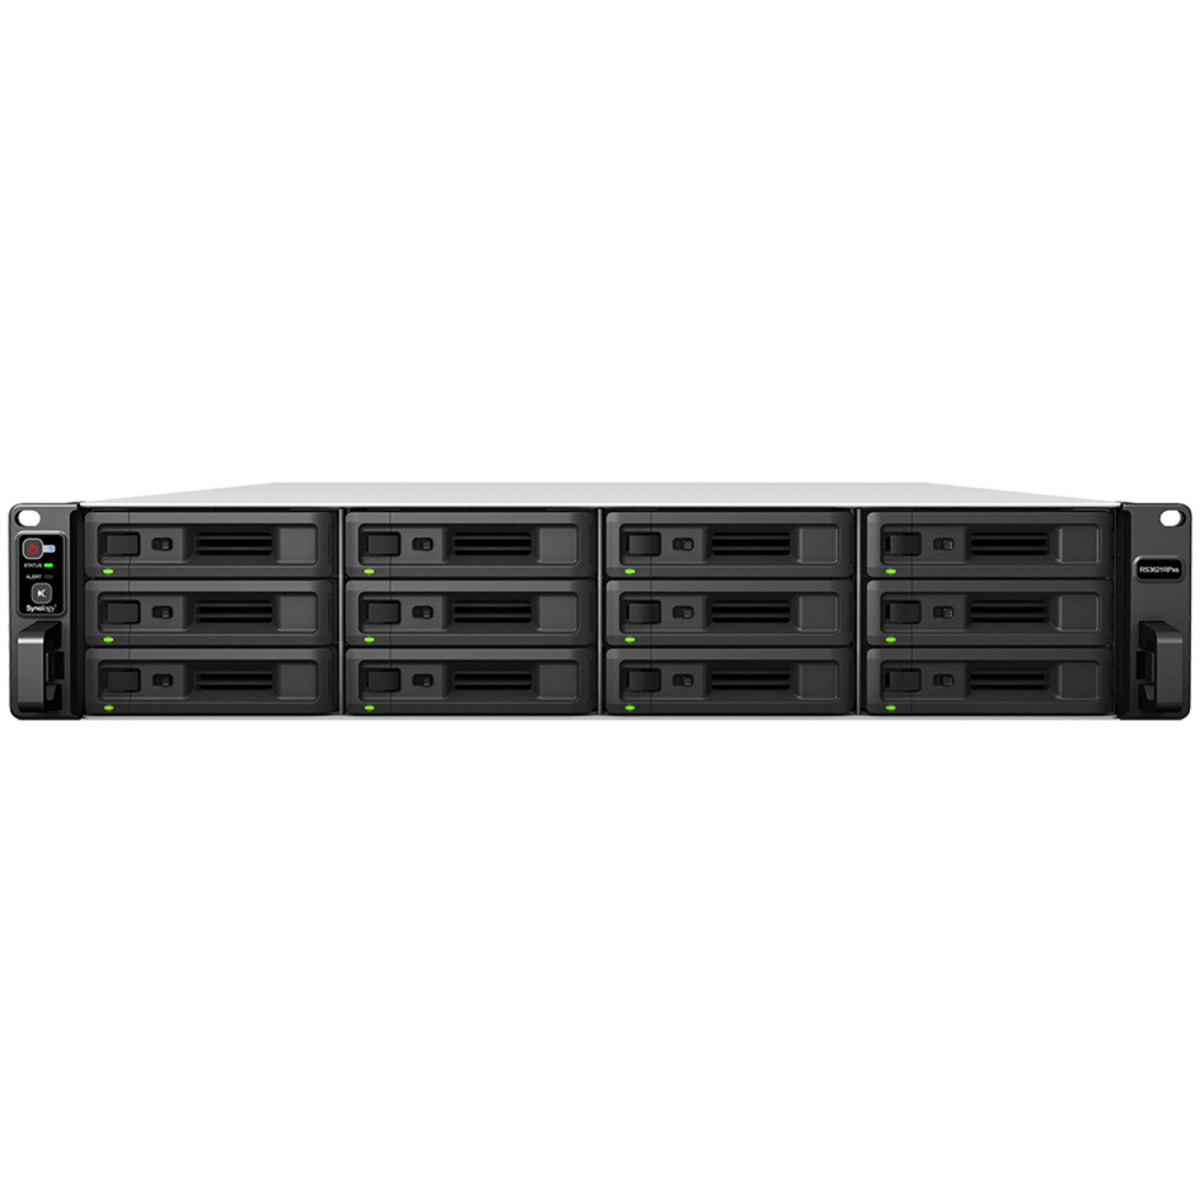 buy $7310 Synology RackStation RS3621RPxs 96tb RackMount NAS - Network Attached Storage Device 12x8000gb Seagate EXOS ST8000NM000A 3.5 7200rpm SATA 6Gb/s HDD ENTERPRISE Class Drives Installed - Burn-In Tested - nas headquarters buy network attached storage server device das new raid-5 free shipping usa christmas new year holiday sale RackStation RS3621RPxs